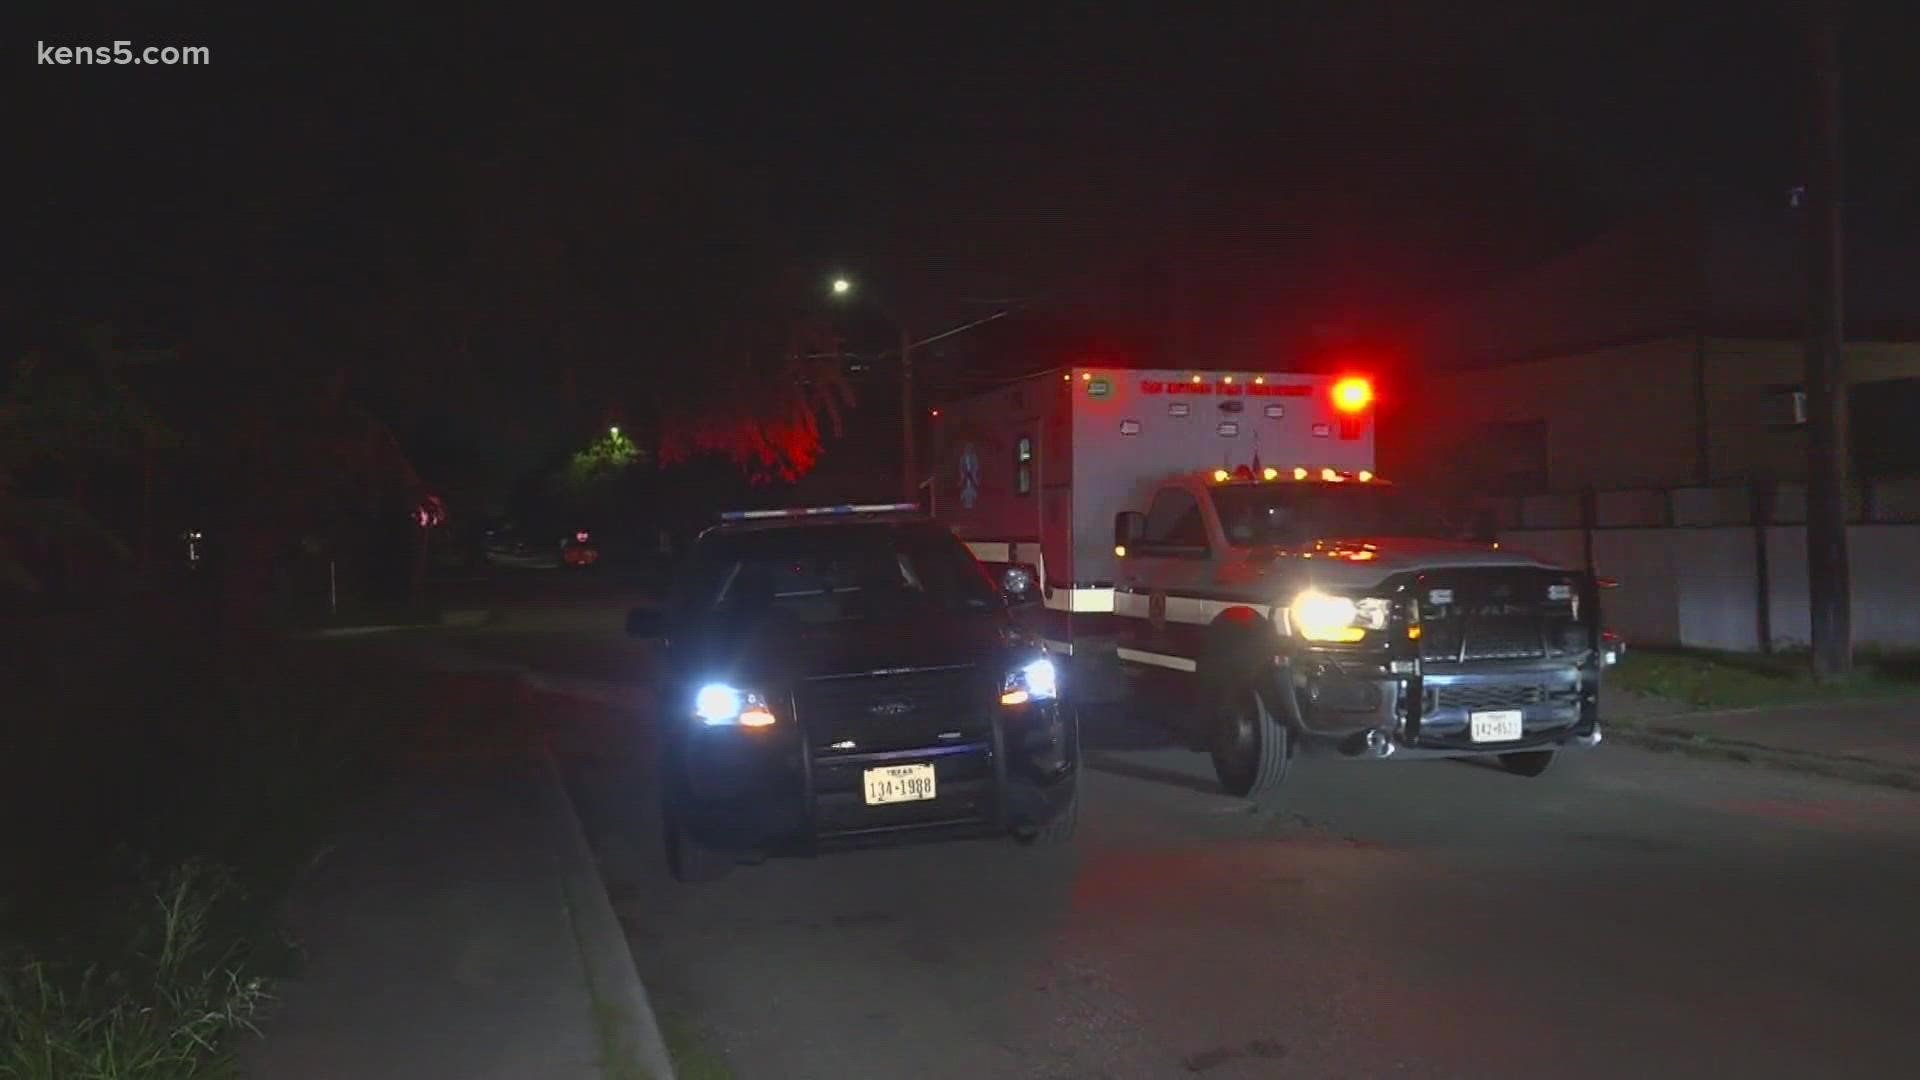 A man was found with multiple stab wounds in a neighborhood west of downtown, the San Antonio Police Department said.